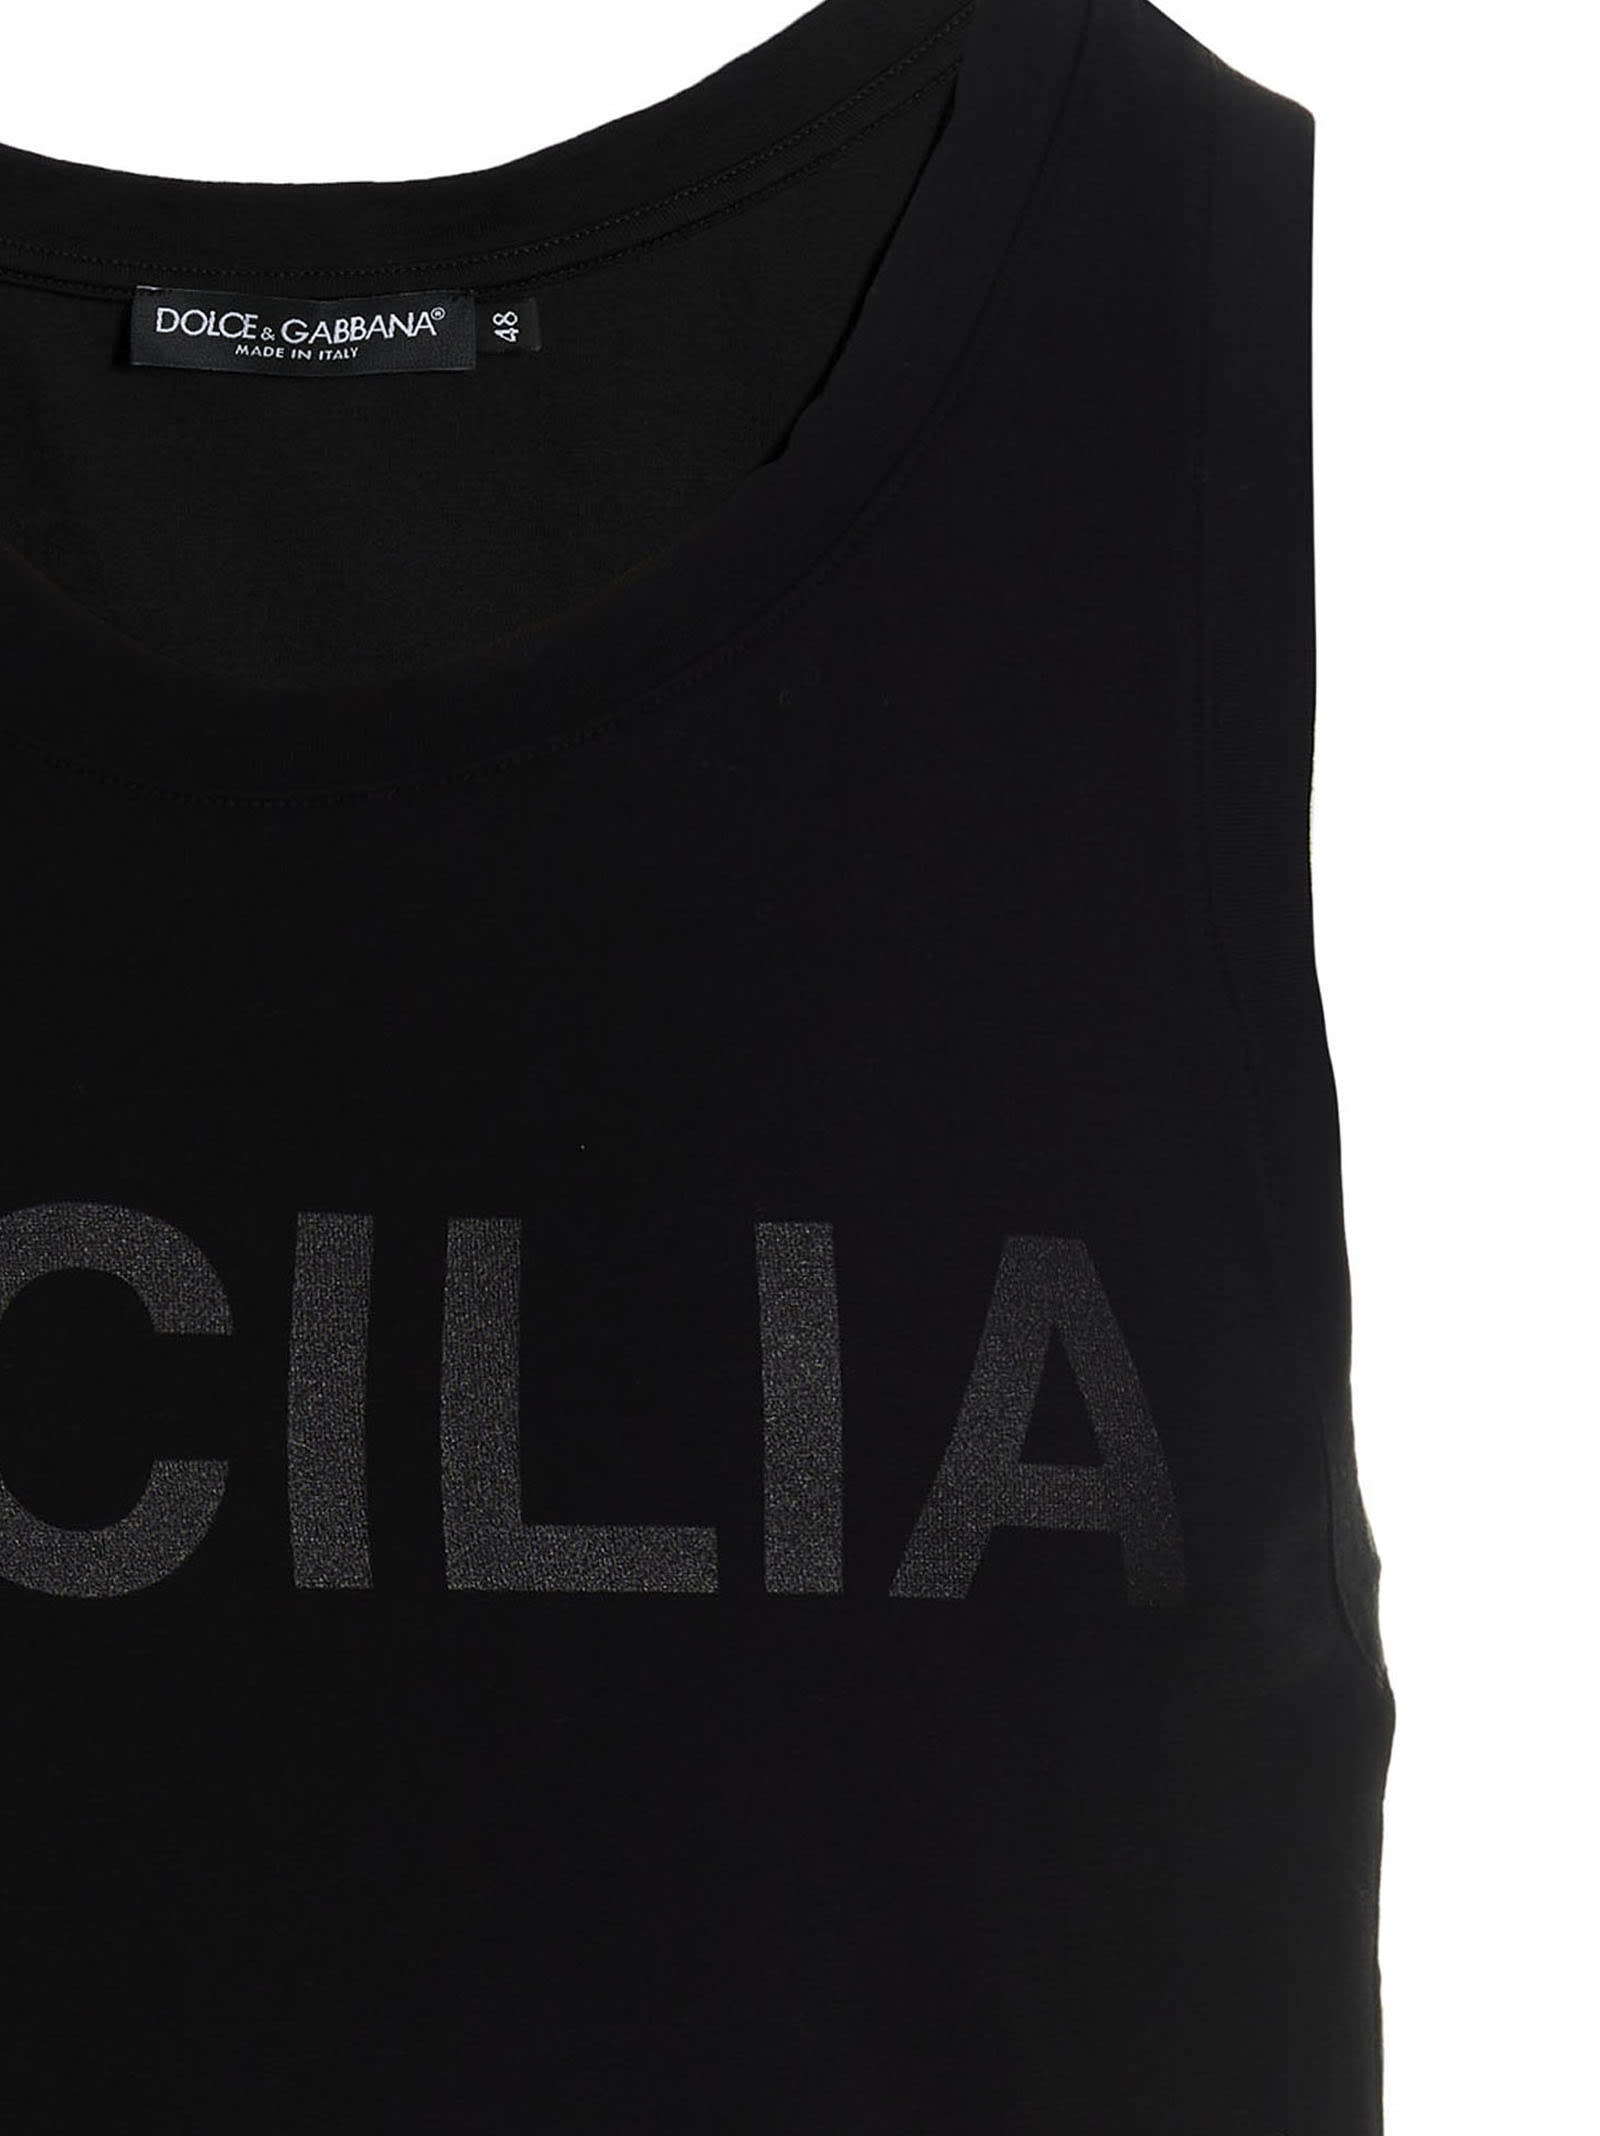 Shop Dolce & Gabbana Re-edition S/s 2003 Tank Top In Black